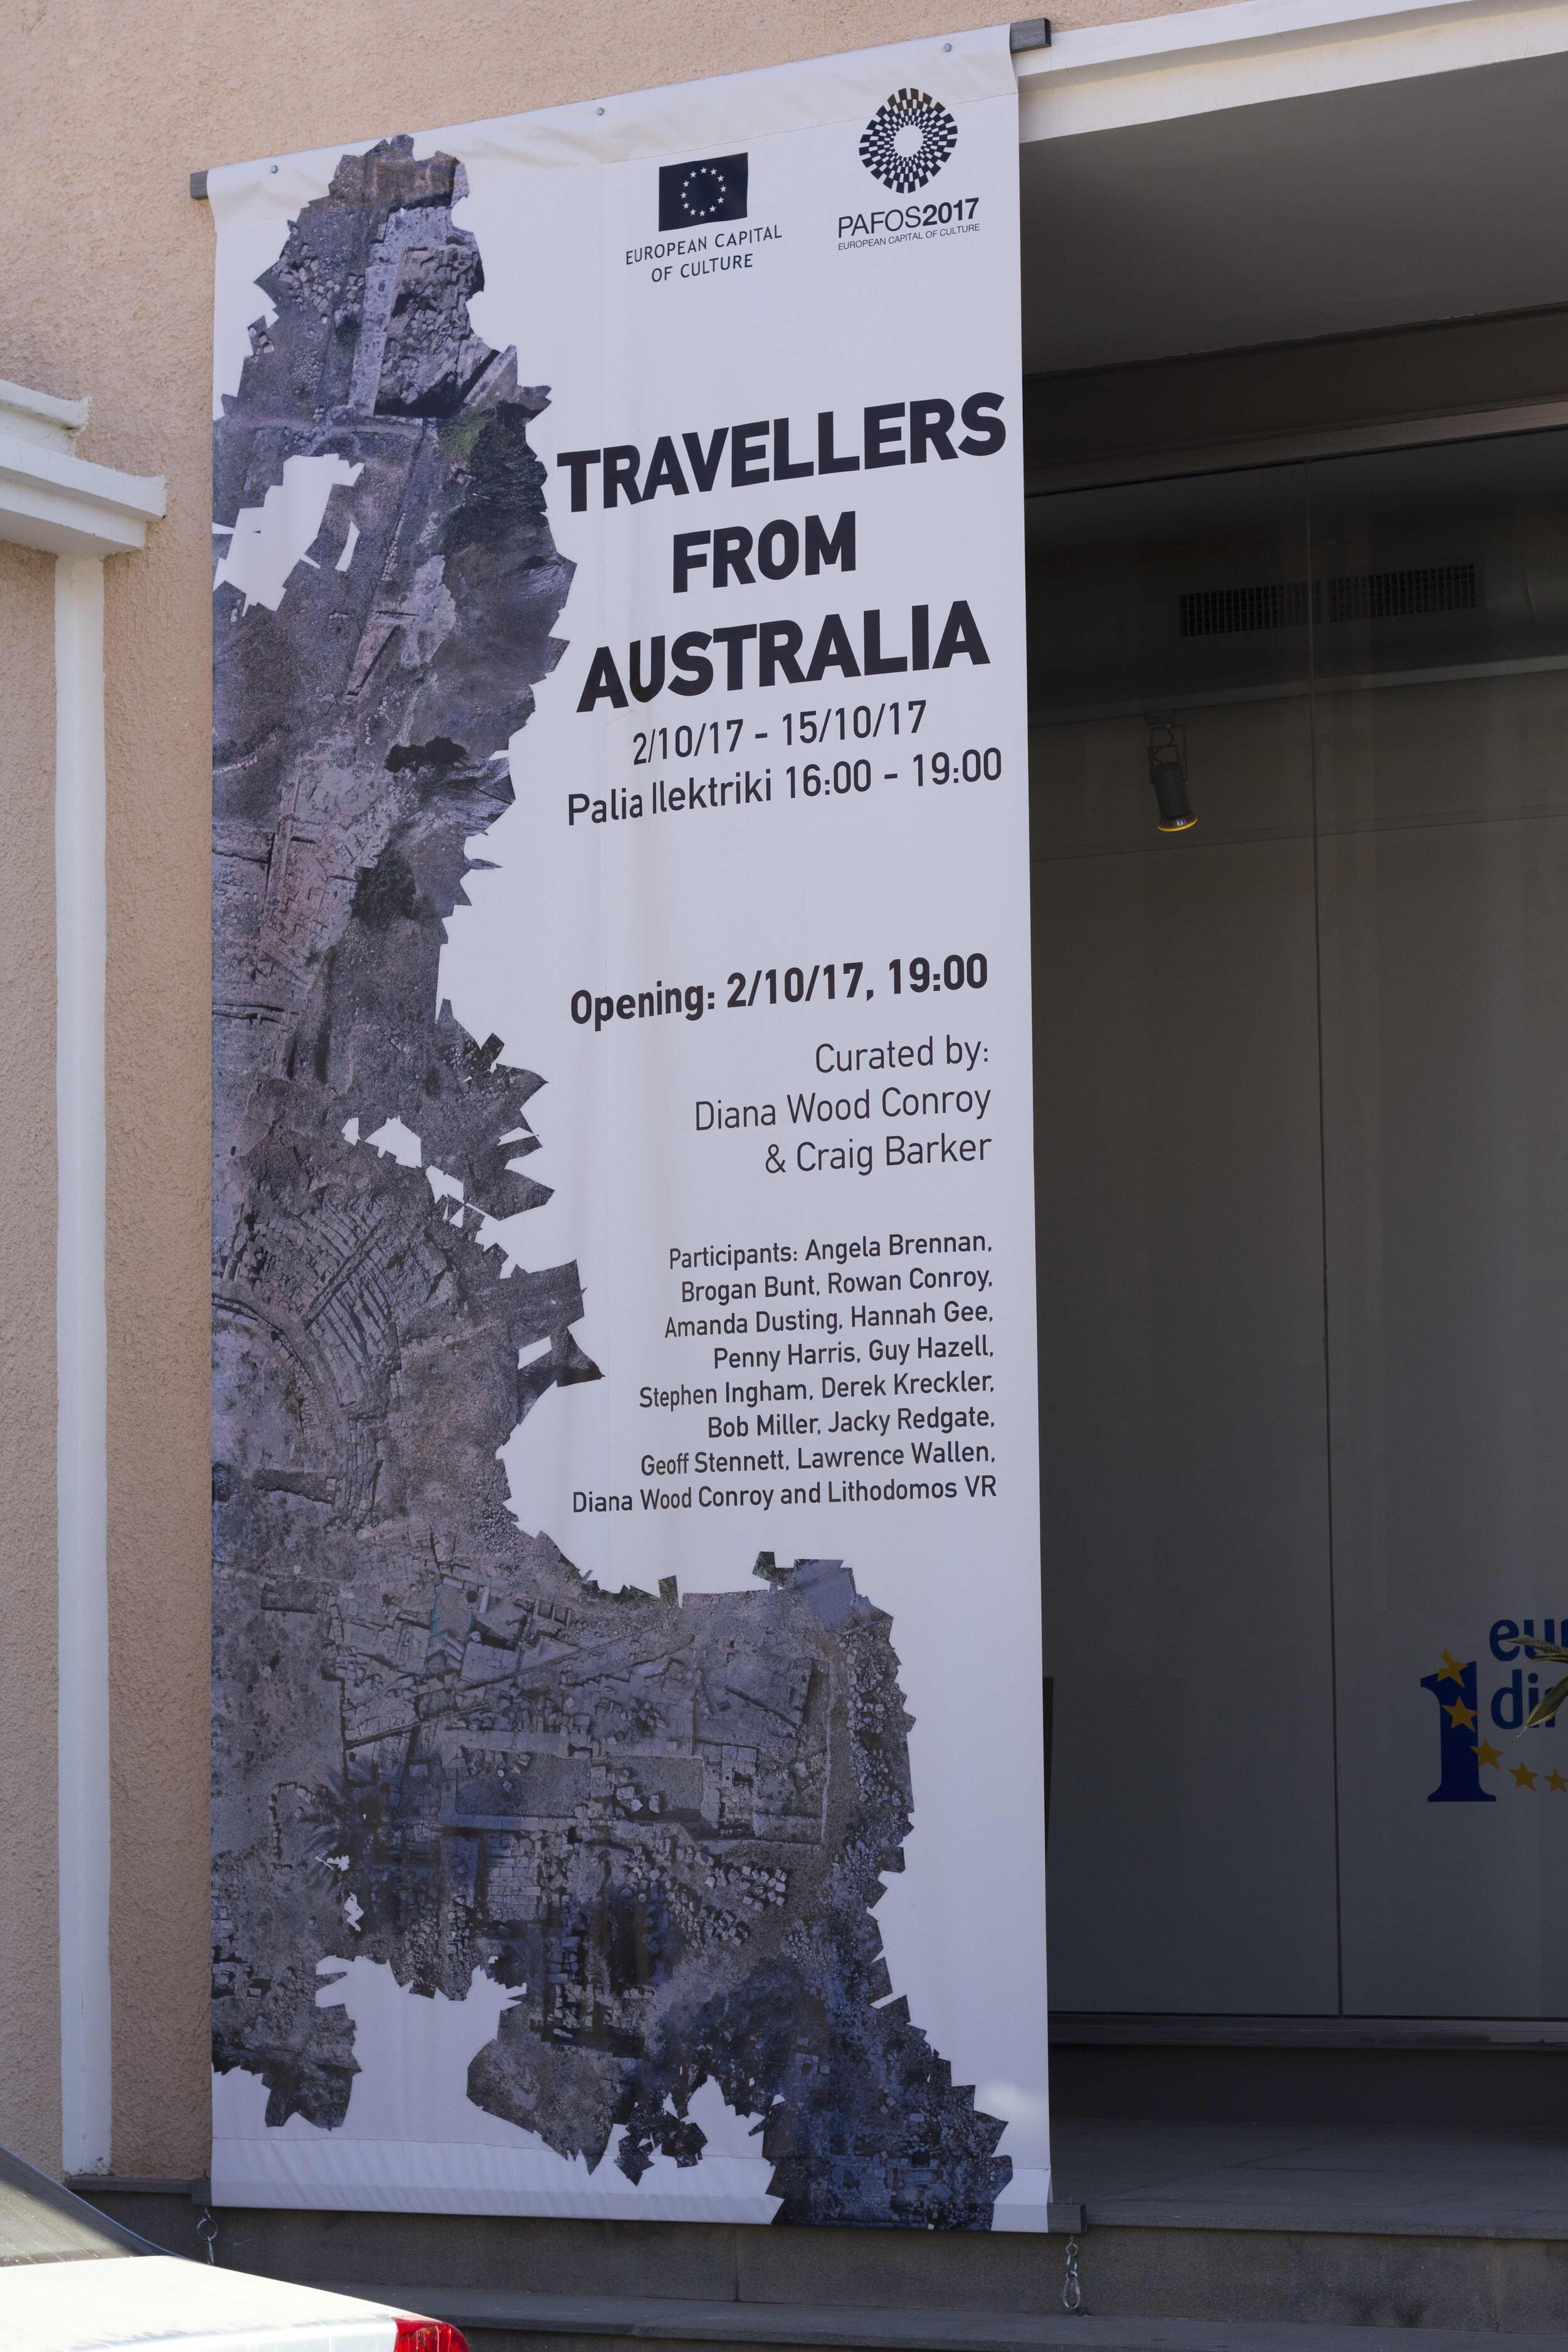  Exterior gallery photograph of the   Pailia Ilektriki, Ktima Pafos, Cyprus, 2-15 October 2017, during the group exhibition  Travellers from Australia  curated by Craig Barker and Diana Wood Conroy. Photo: Shelley Webster. 